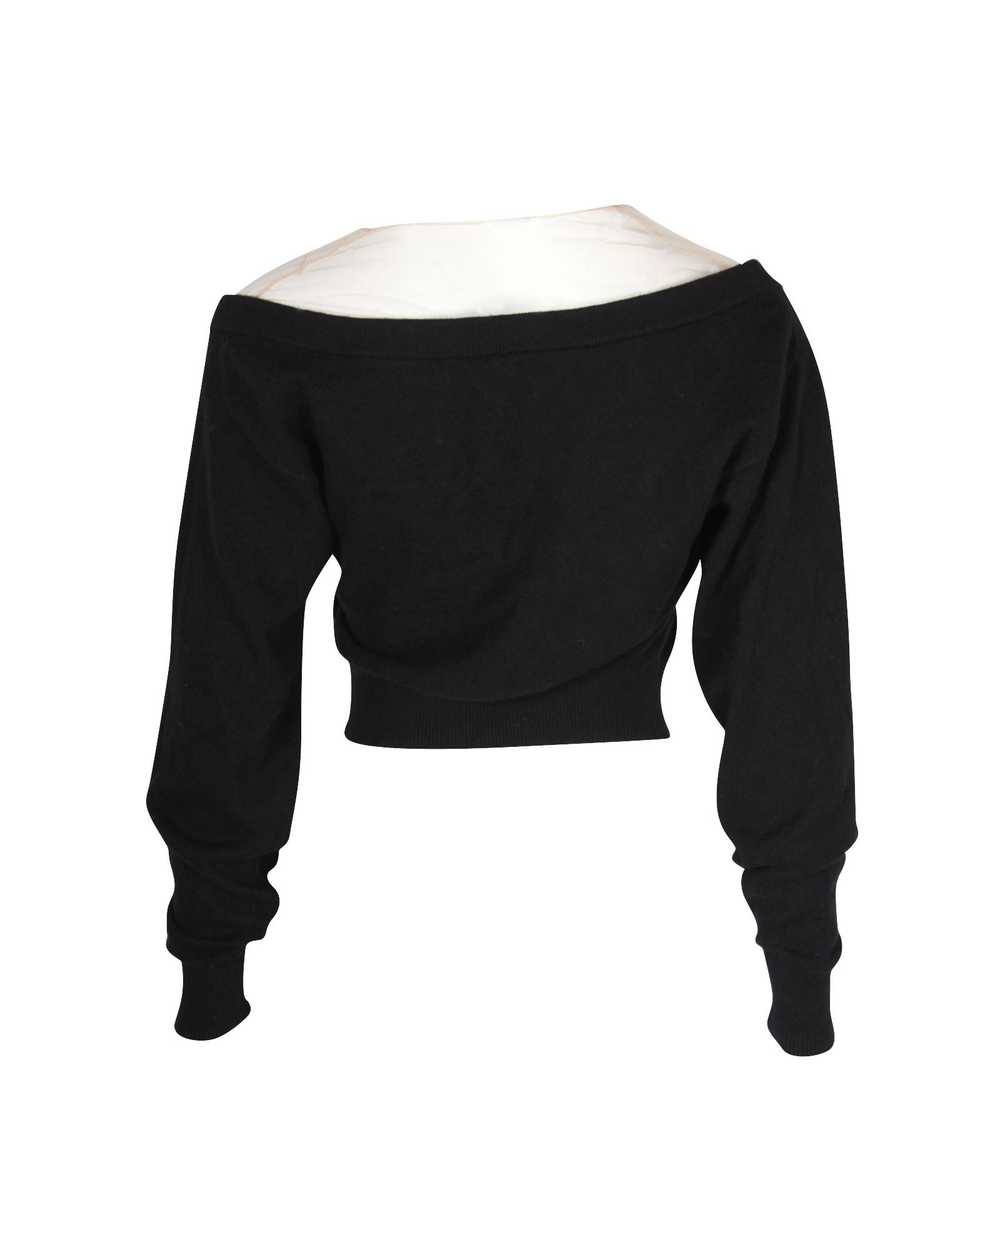 Product Details Alexander Wang Black Wool Cropped… - image 3